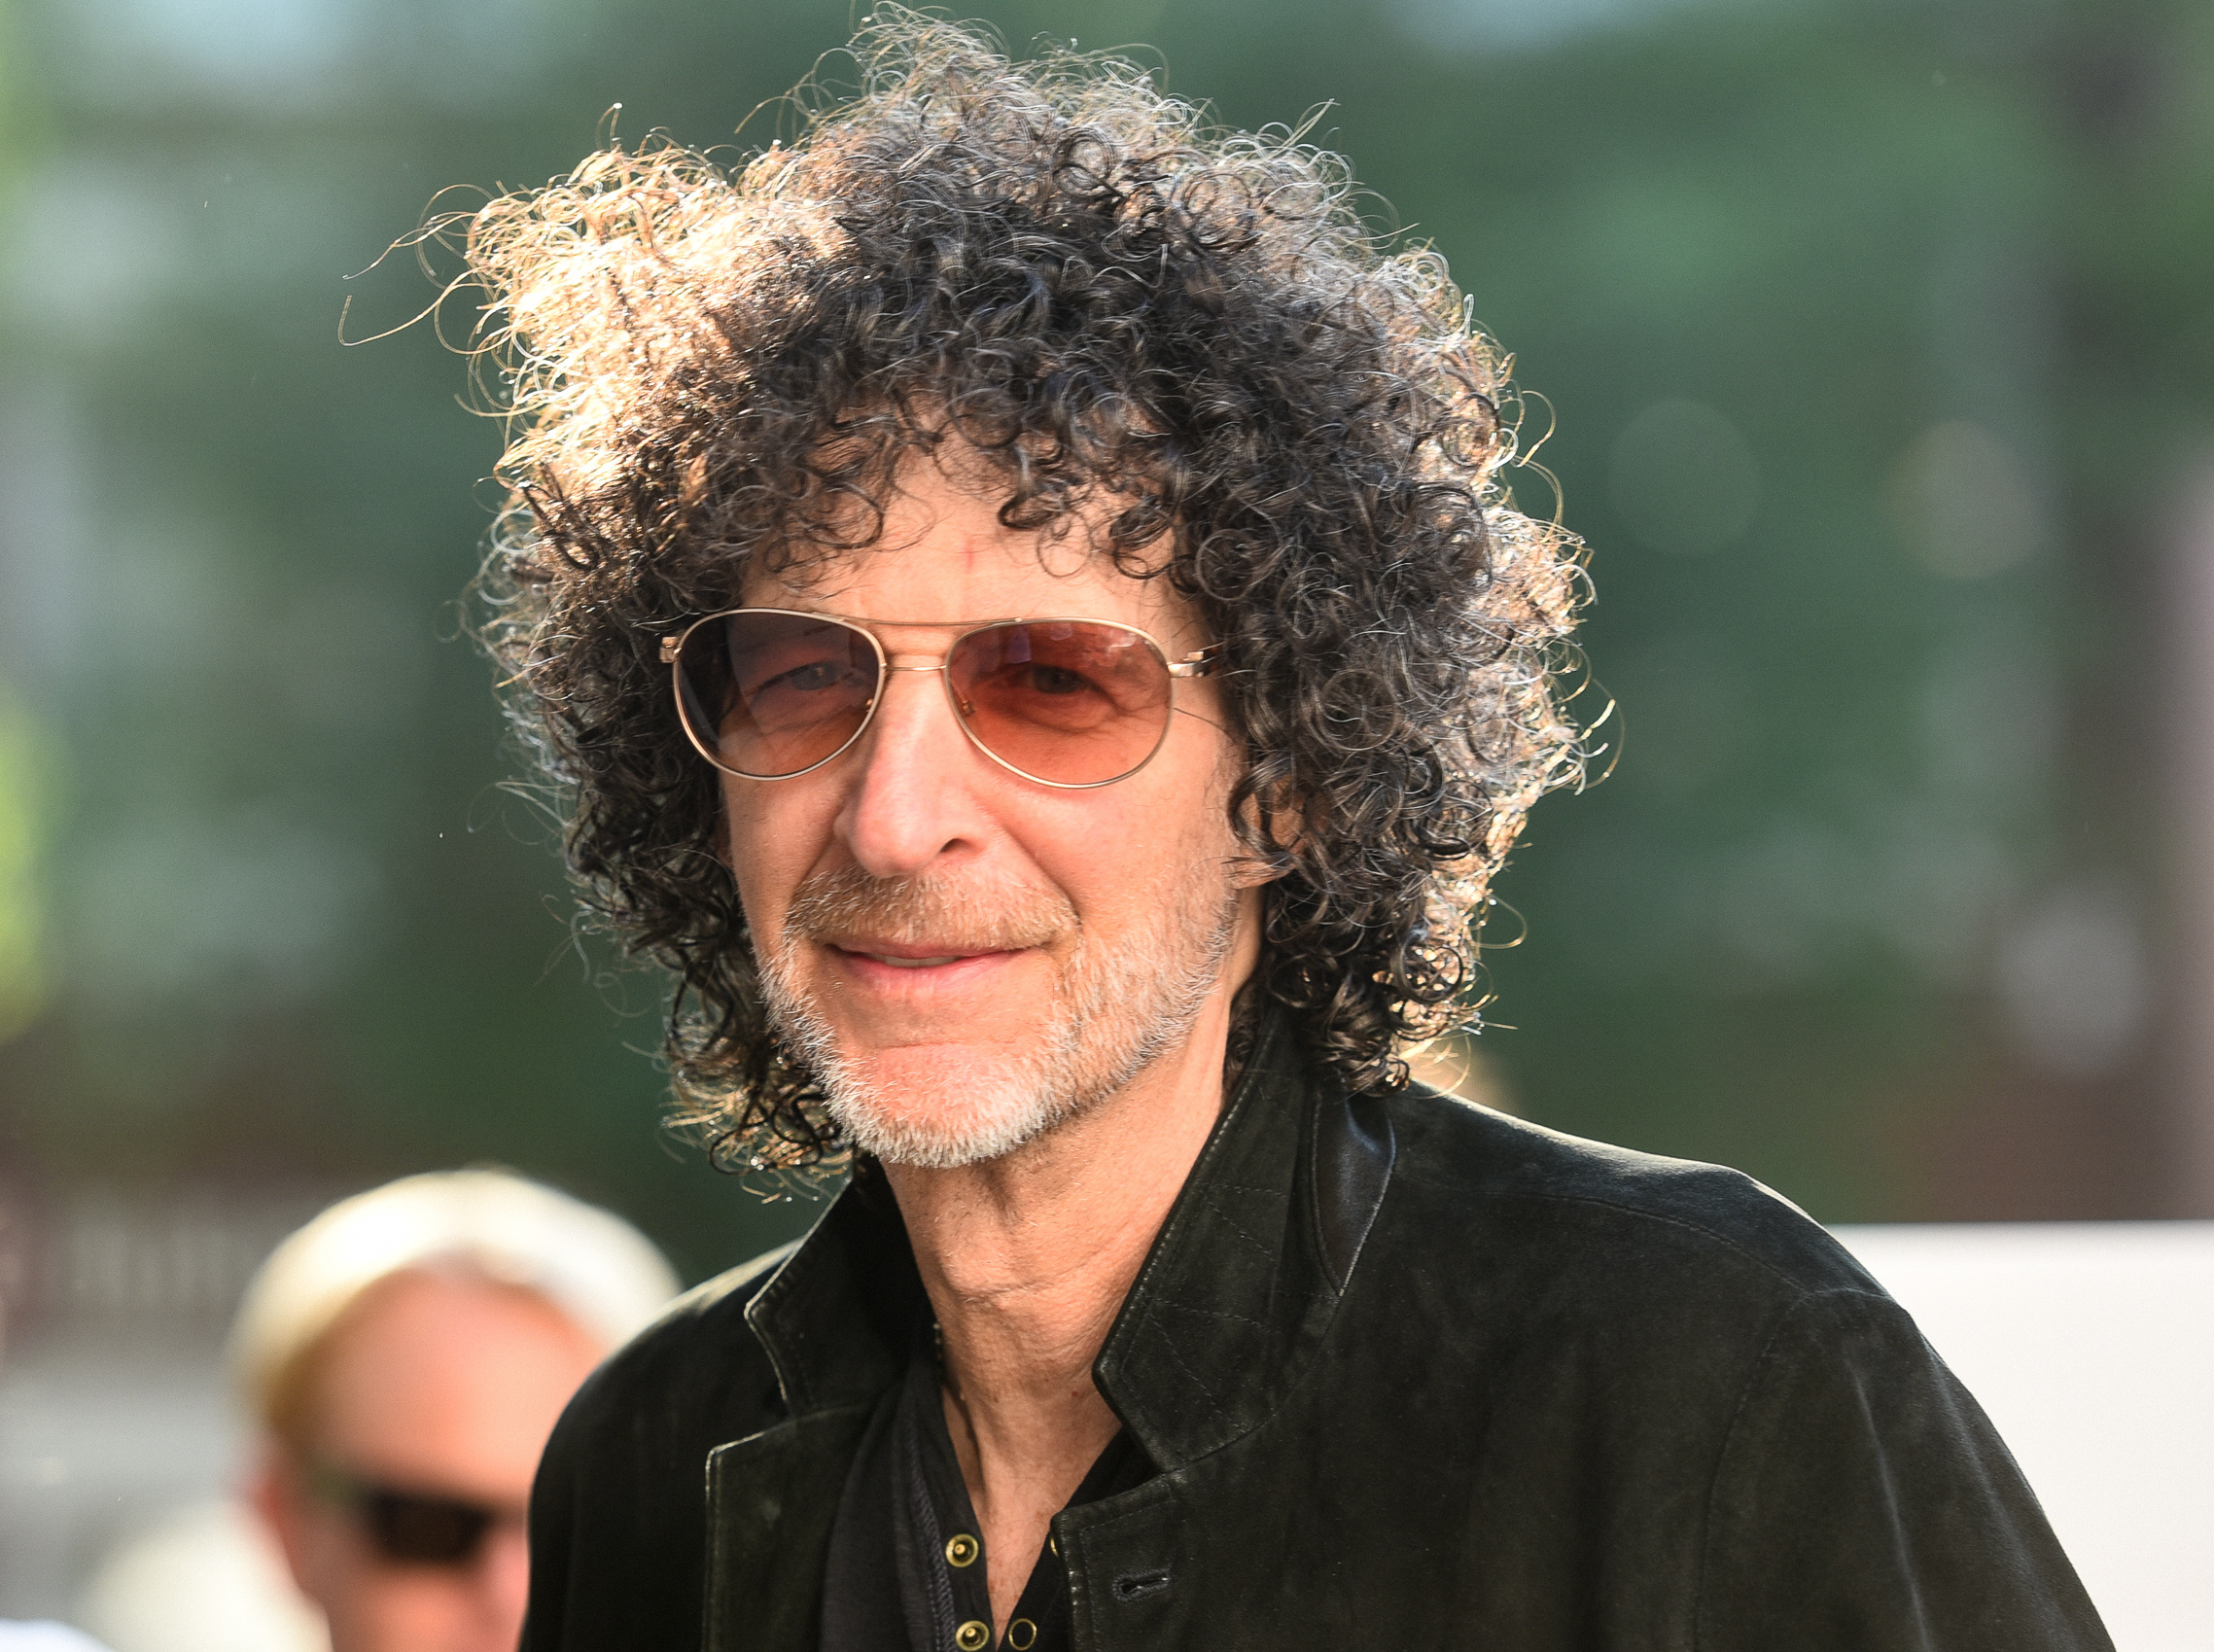 Howard Stern Furious After Accusations of White House Planting Questions in Biden Interview